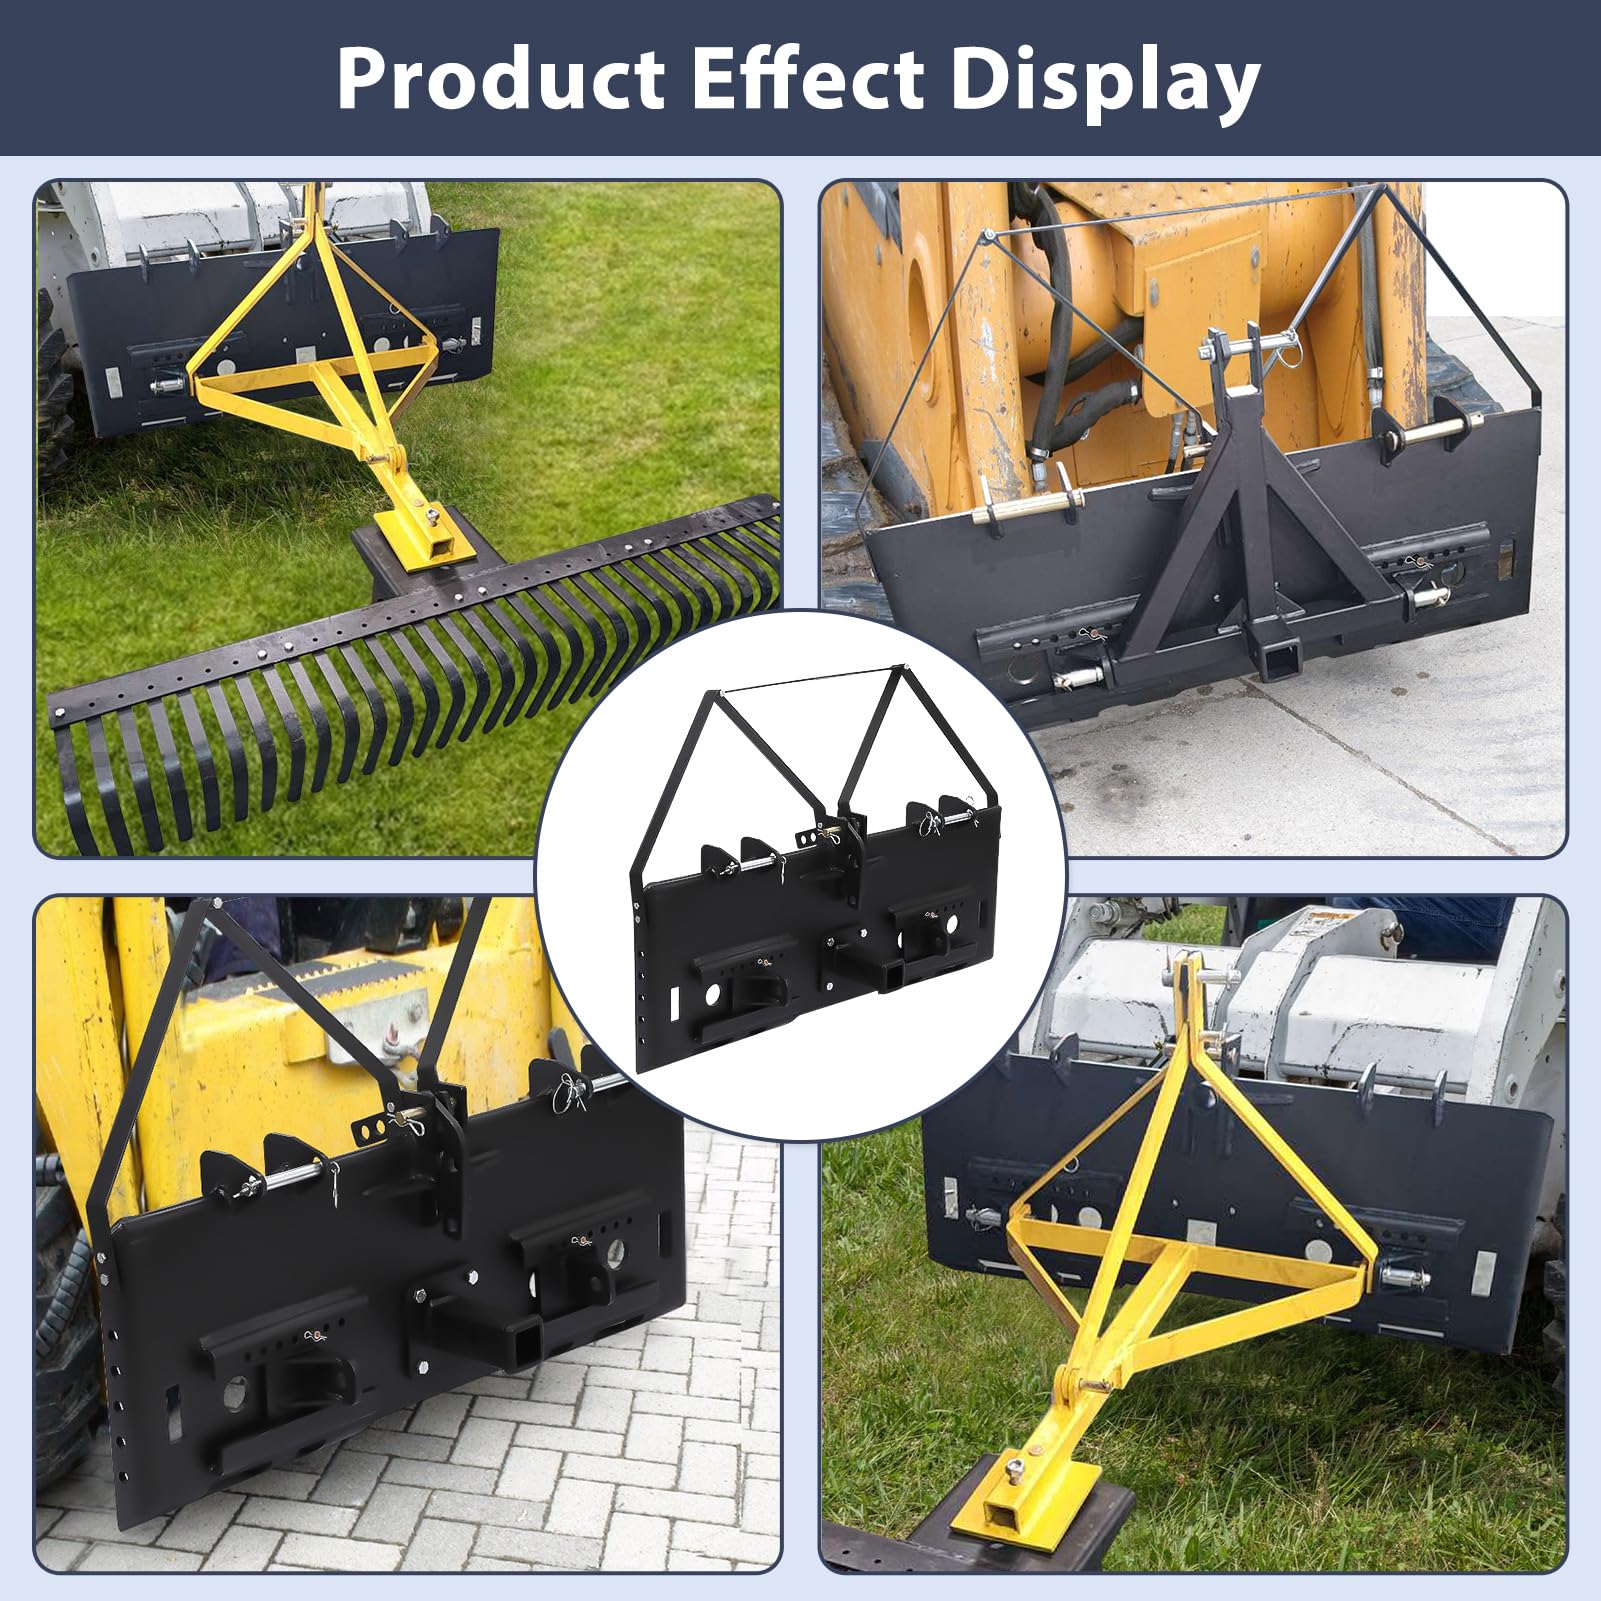 1/2" Skid Steer Mount Plate Compatible for Detachable 2" Receiver & Cat1 Connector & 17" 49" Hay Spear & 48'' Pallet Forks, Universal Quick Tach Loader Plate Fits Kubota Bobcat Tractor